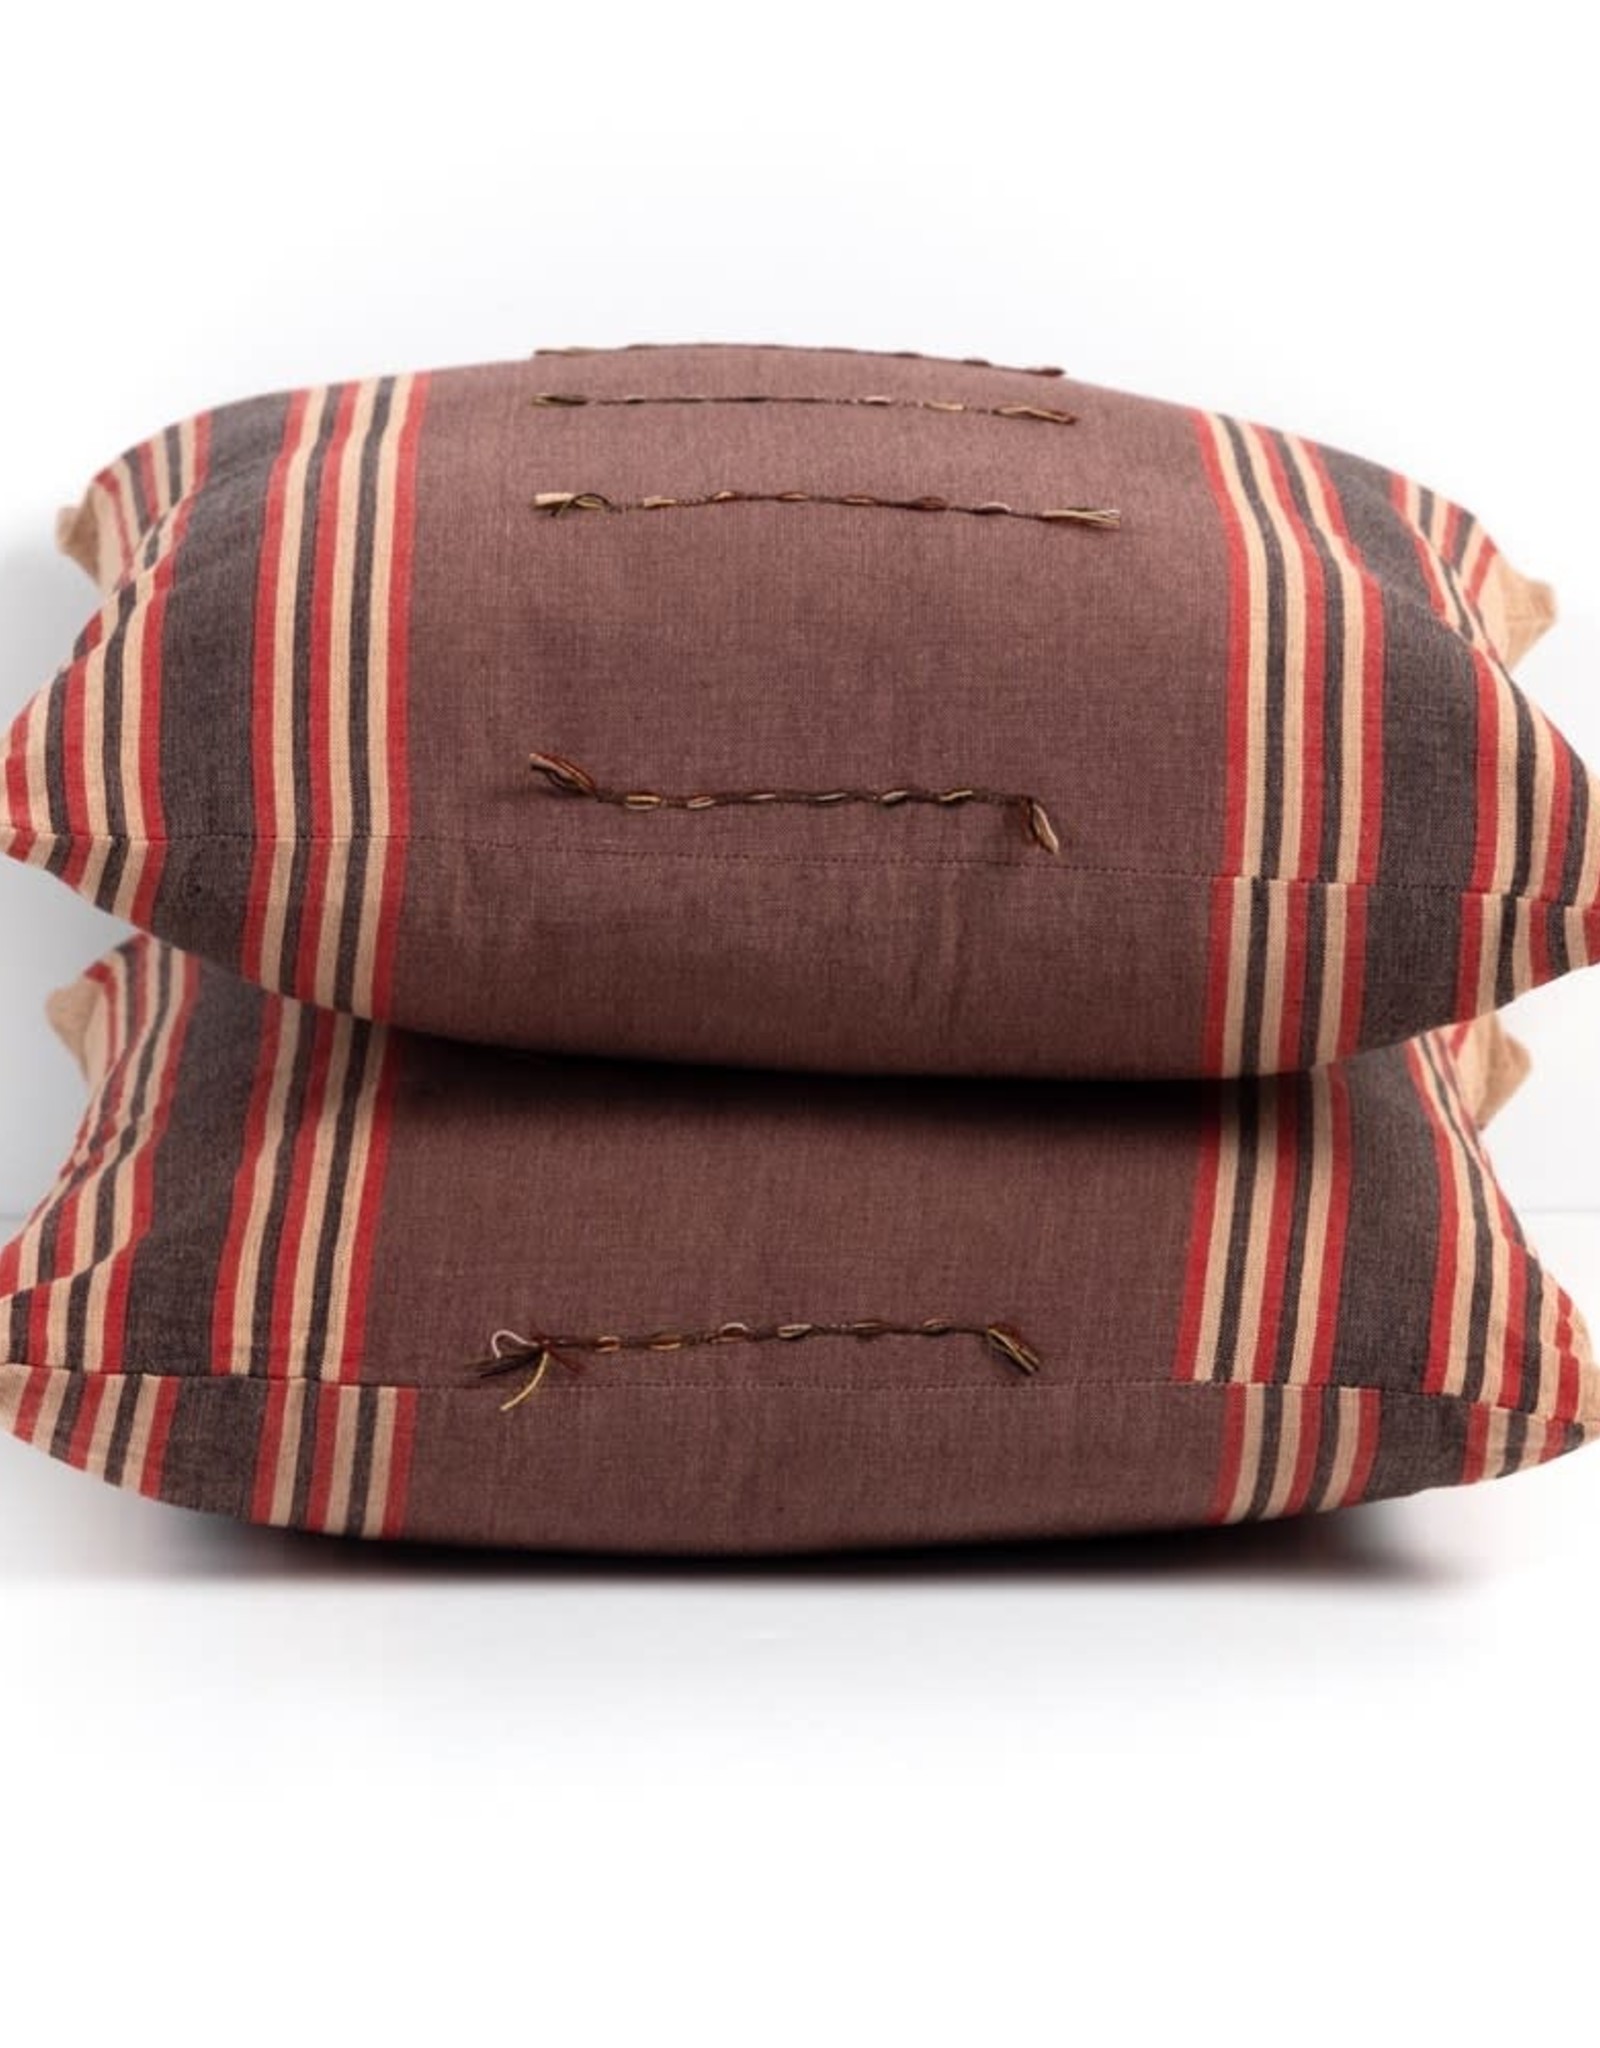 Pillow Archna Rusted Stripe 20"